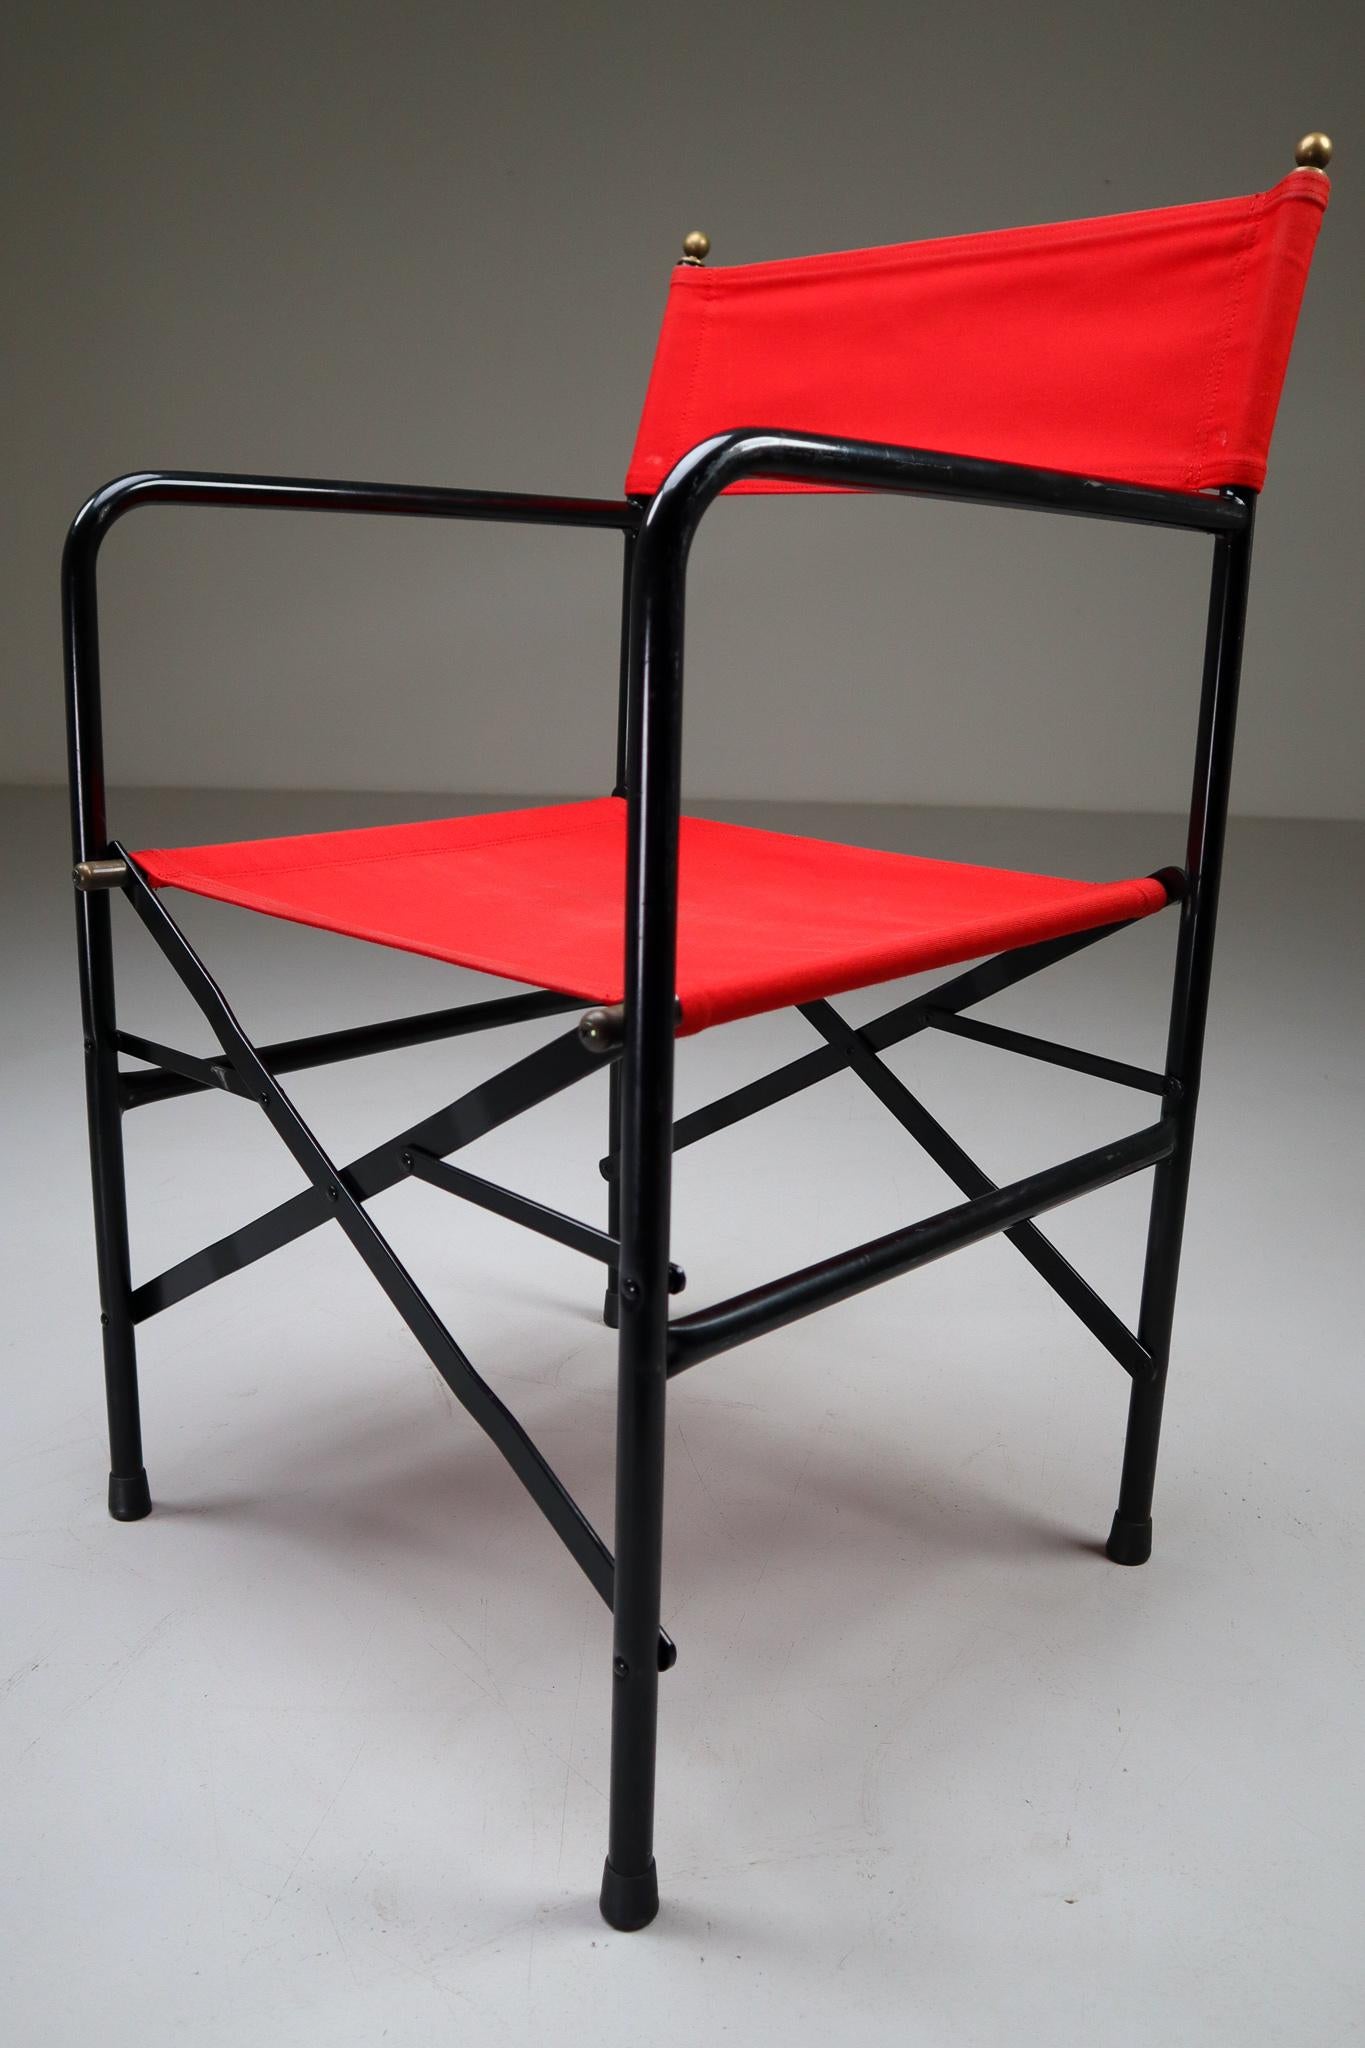 18 Venetian Folding-Patio-Garden Chairs in Steel, Brass and Red Fabric, 1980s For Sale 1